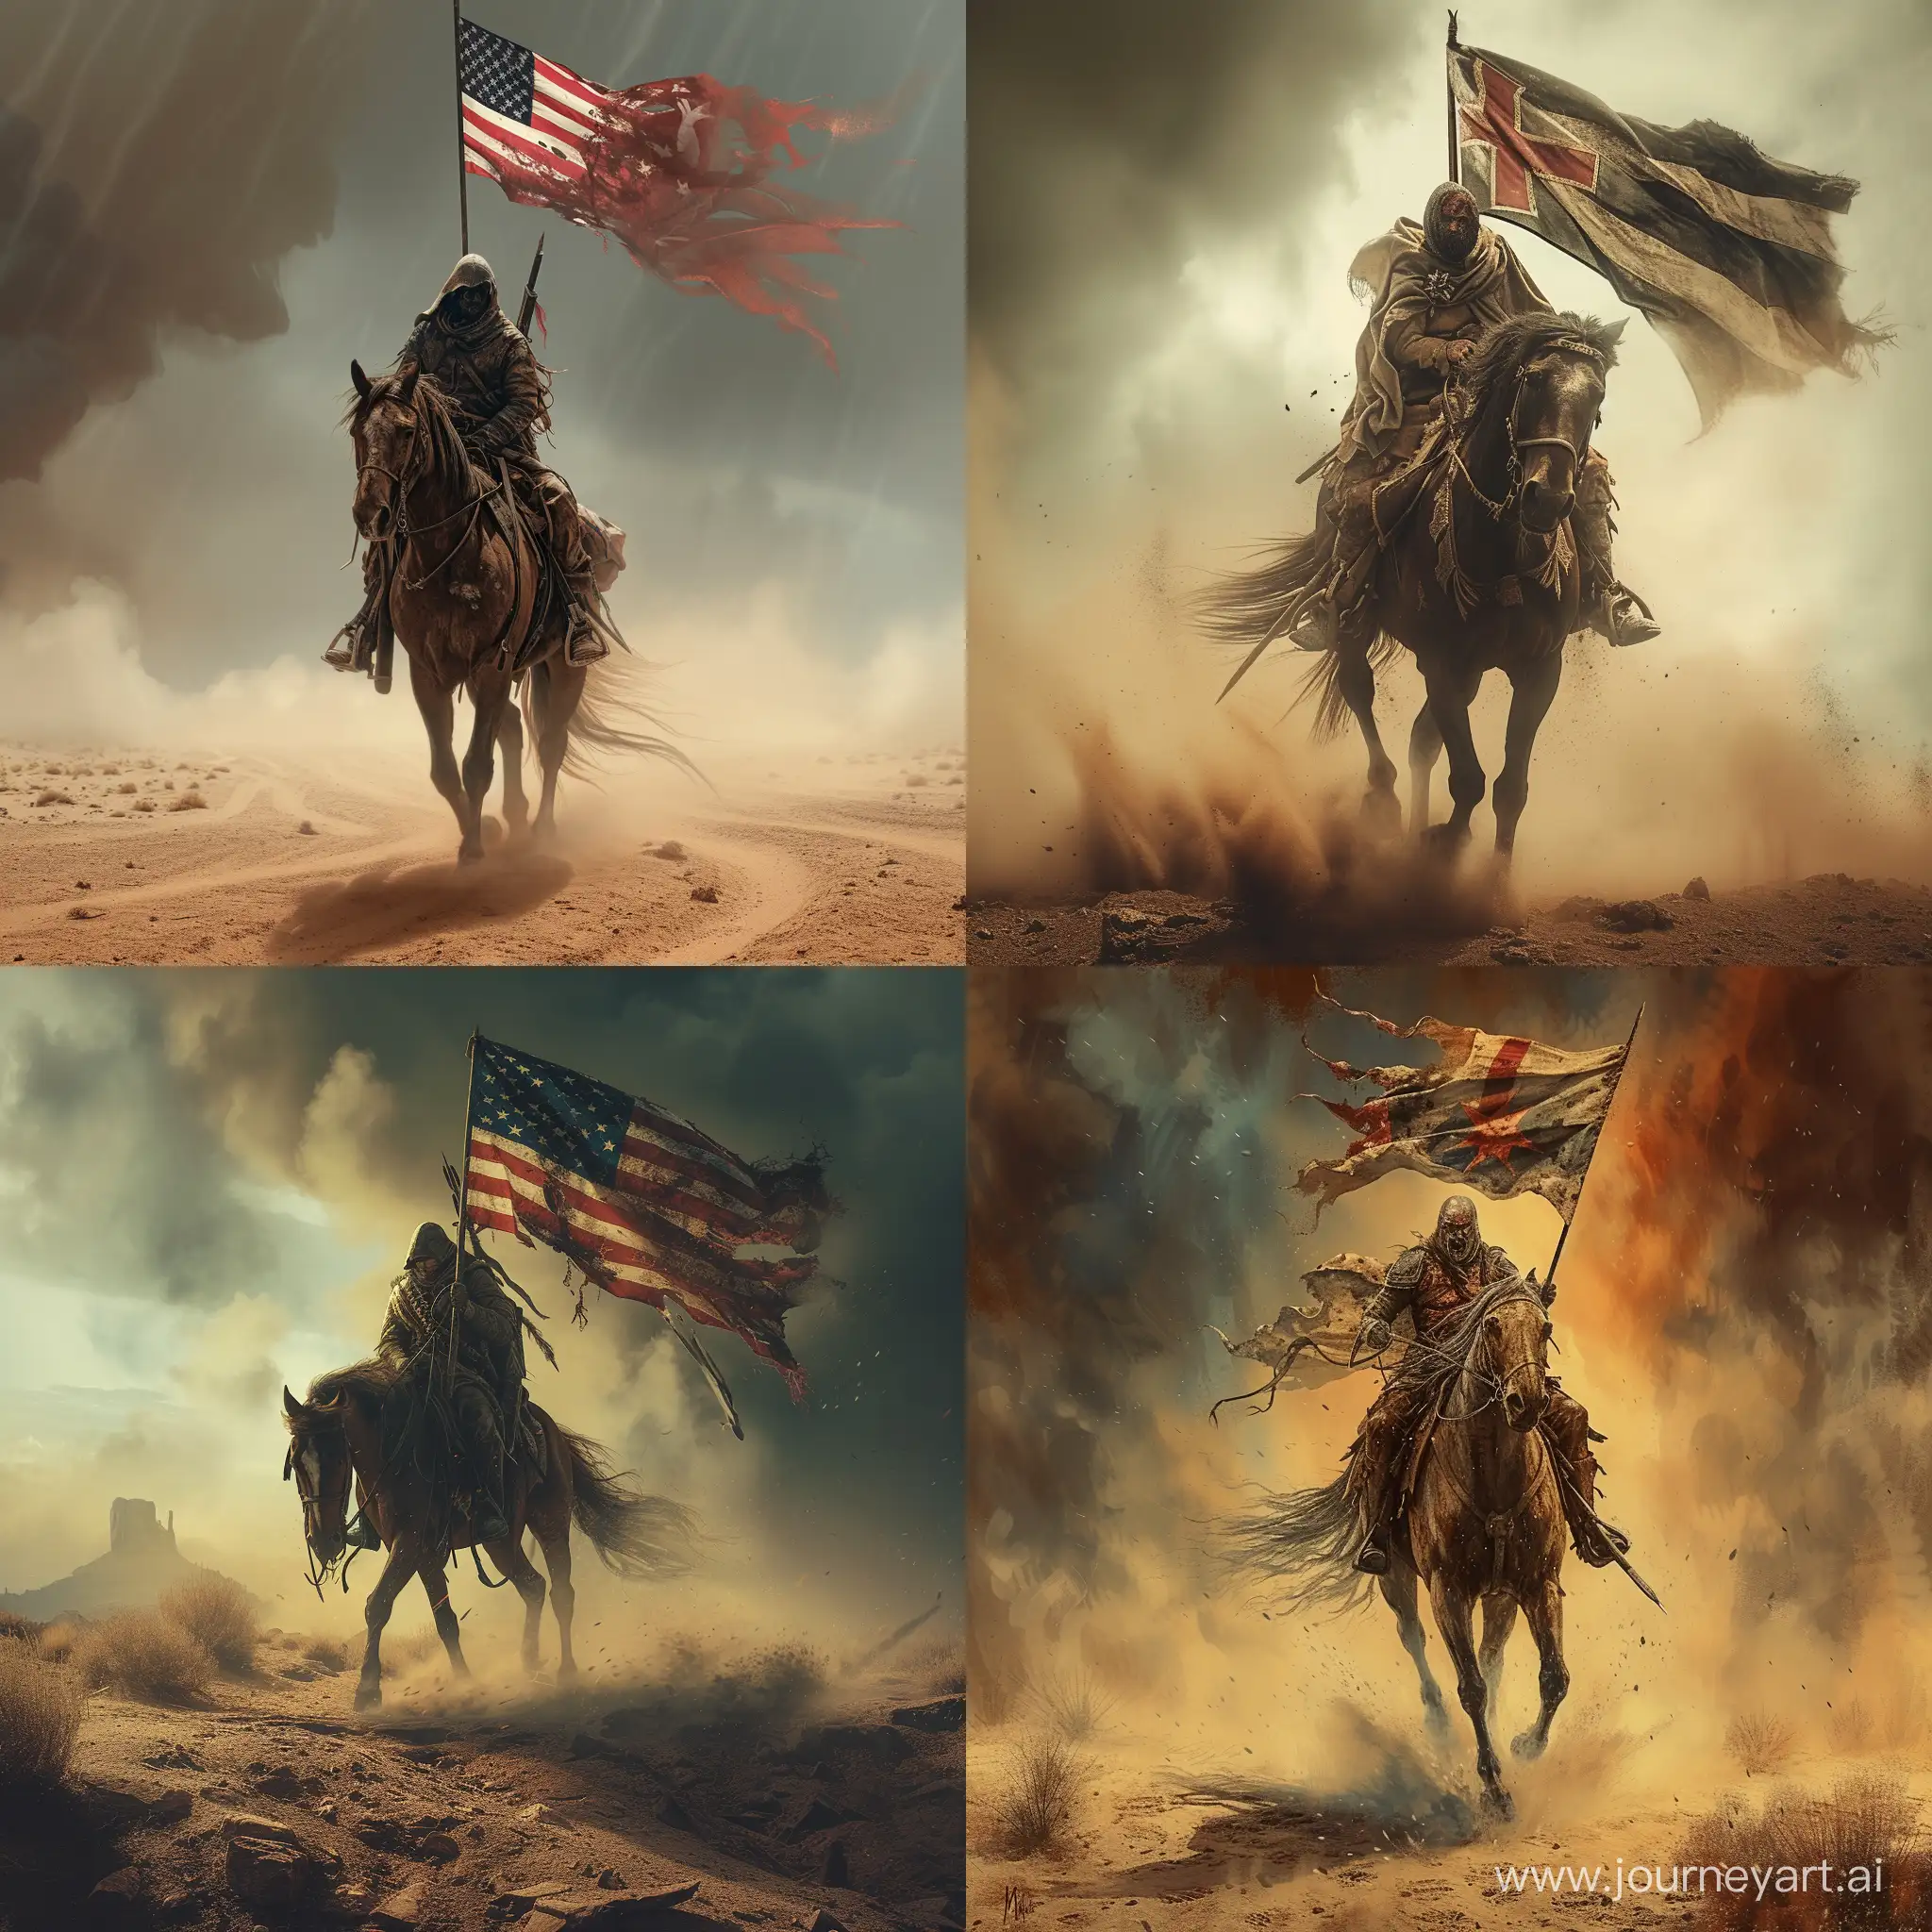 Tense-Warrior-Riding-into-Battle-on-Wounded-Horse-with-National-Flag